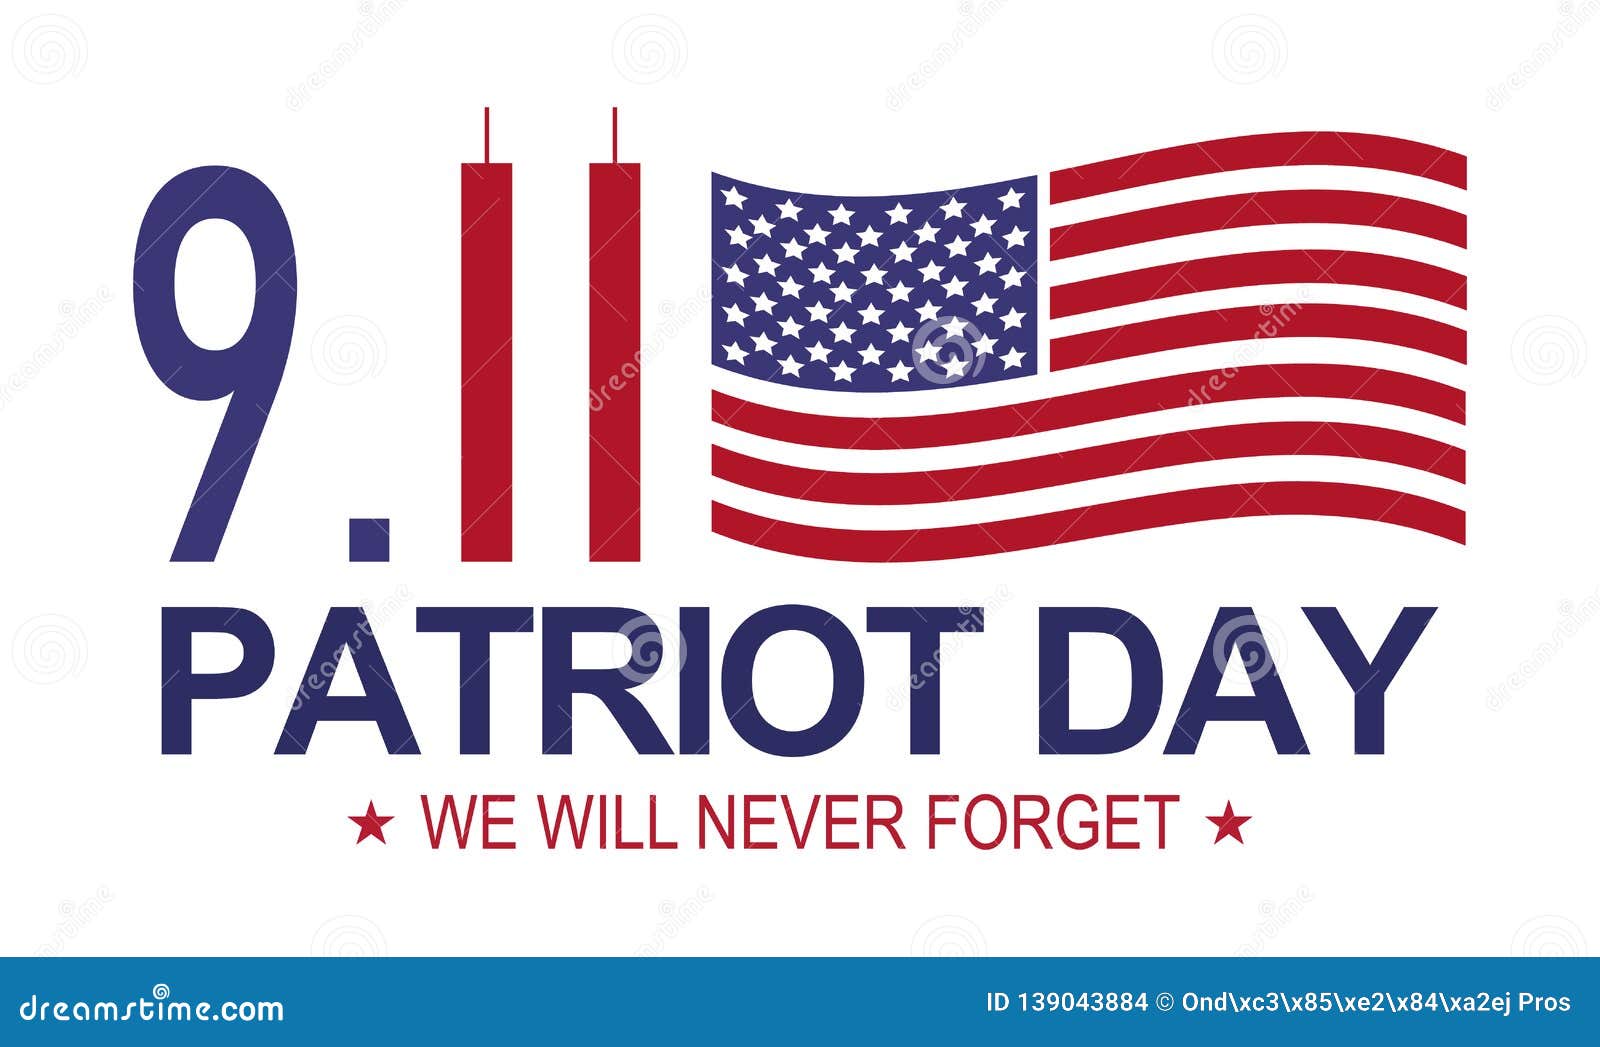 patriot-day-memorial-day-will-never-forget-white-background-patriot-day-memorial-day-will-never-forget-white-background-139043884.jpg